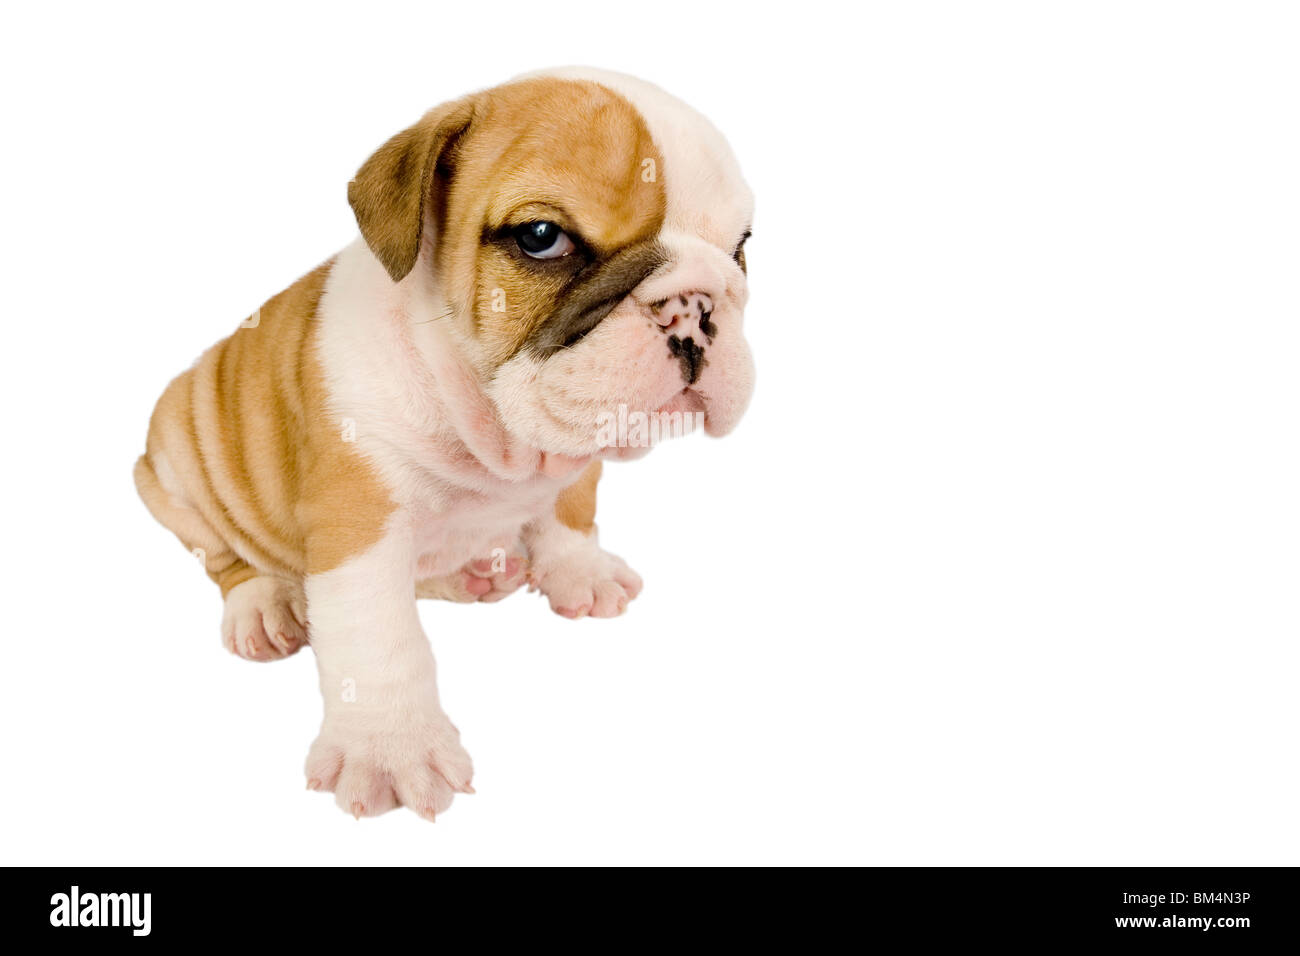 English Bulldog puppy in front of white background Stock Photo